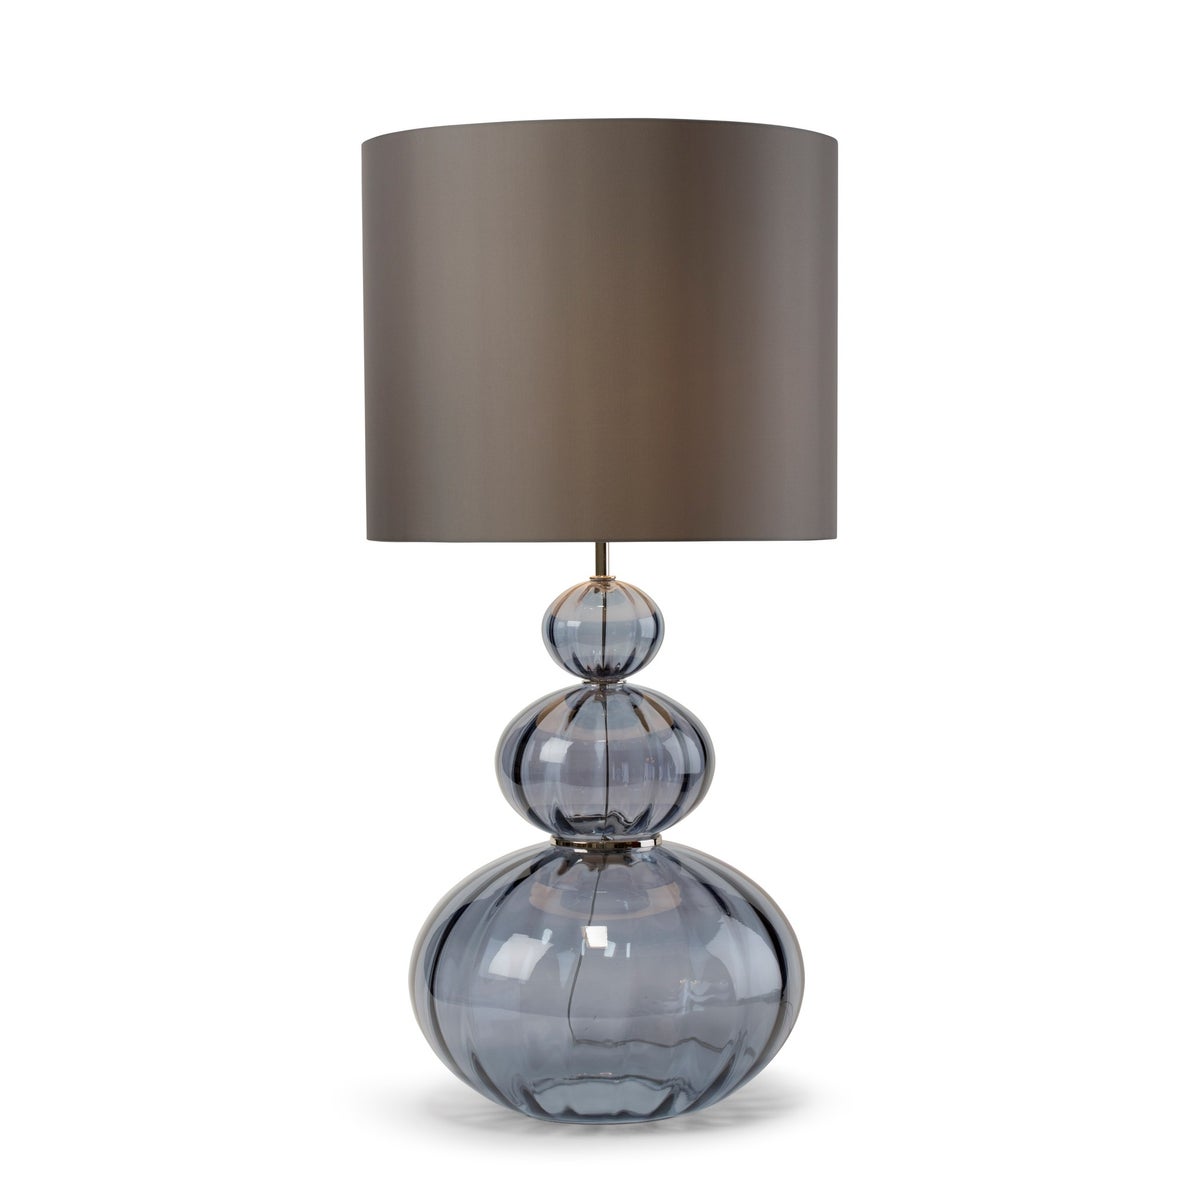 Maggie May Table Lamp - Nickel, Smoke Blue Lineo Glass